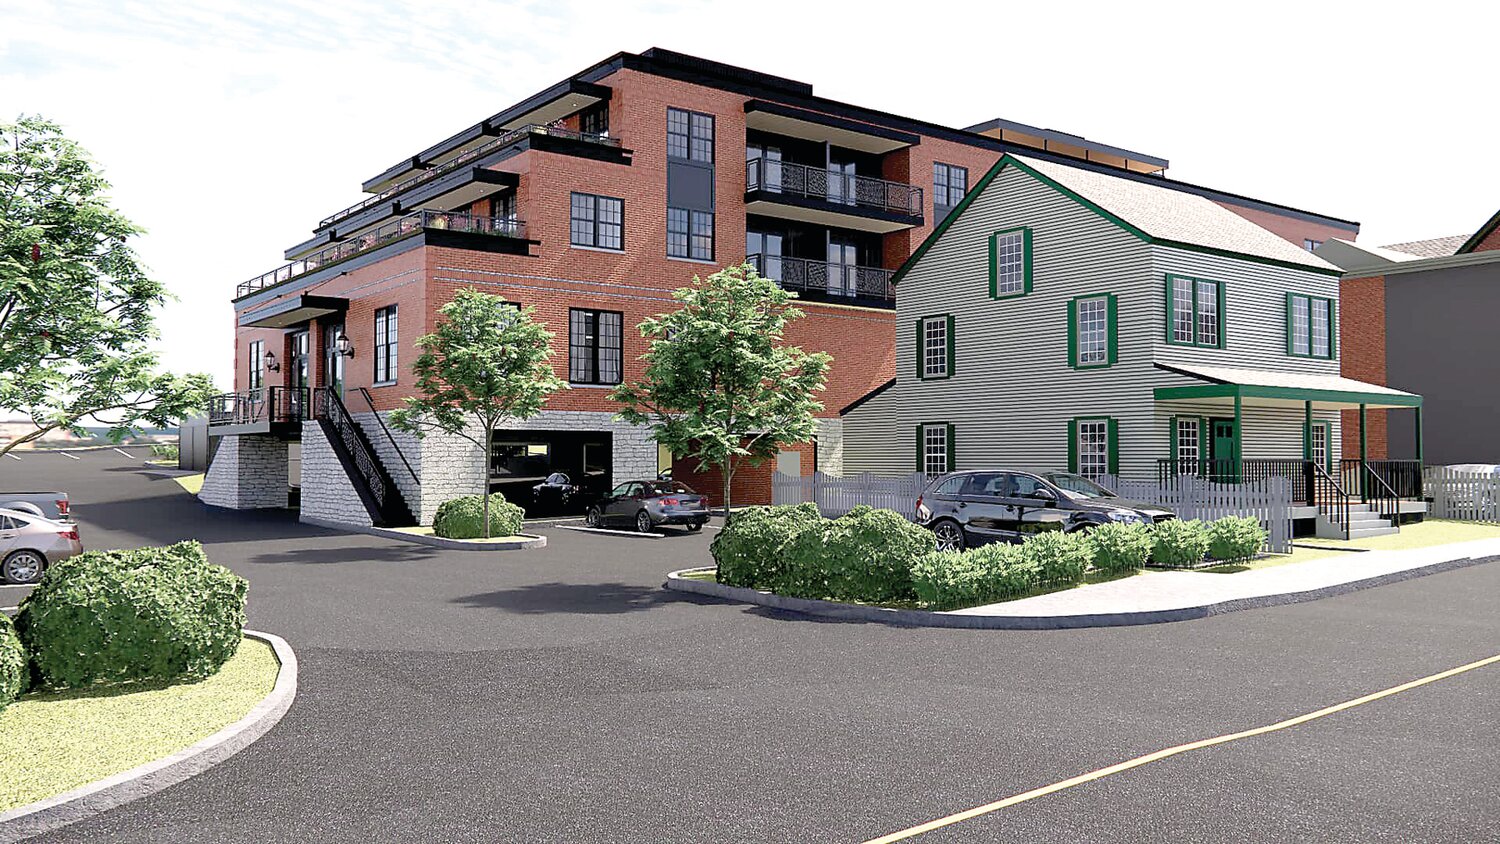 A rendering of the “boutique” hotel planned for the site of the former Doylestown Borough Hall on West Court Street.